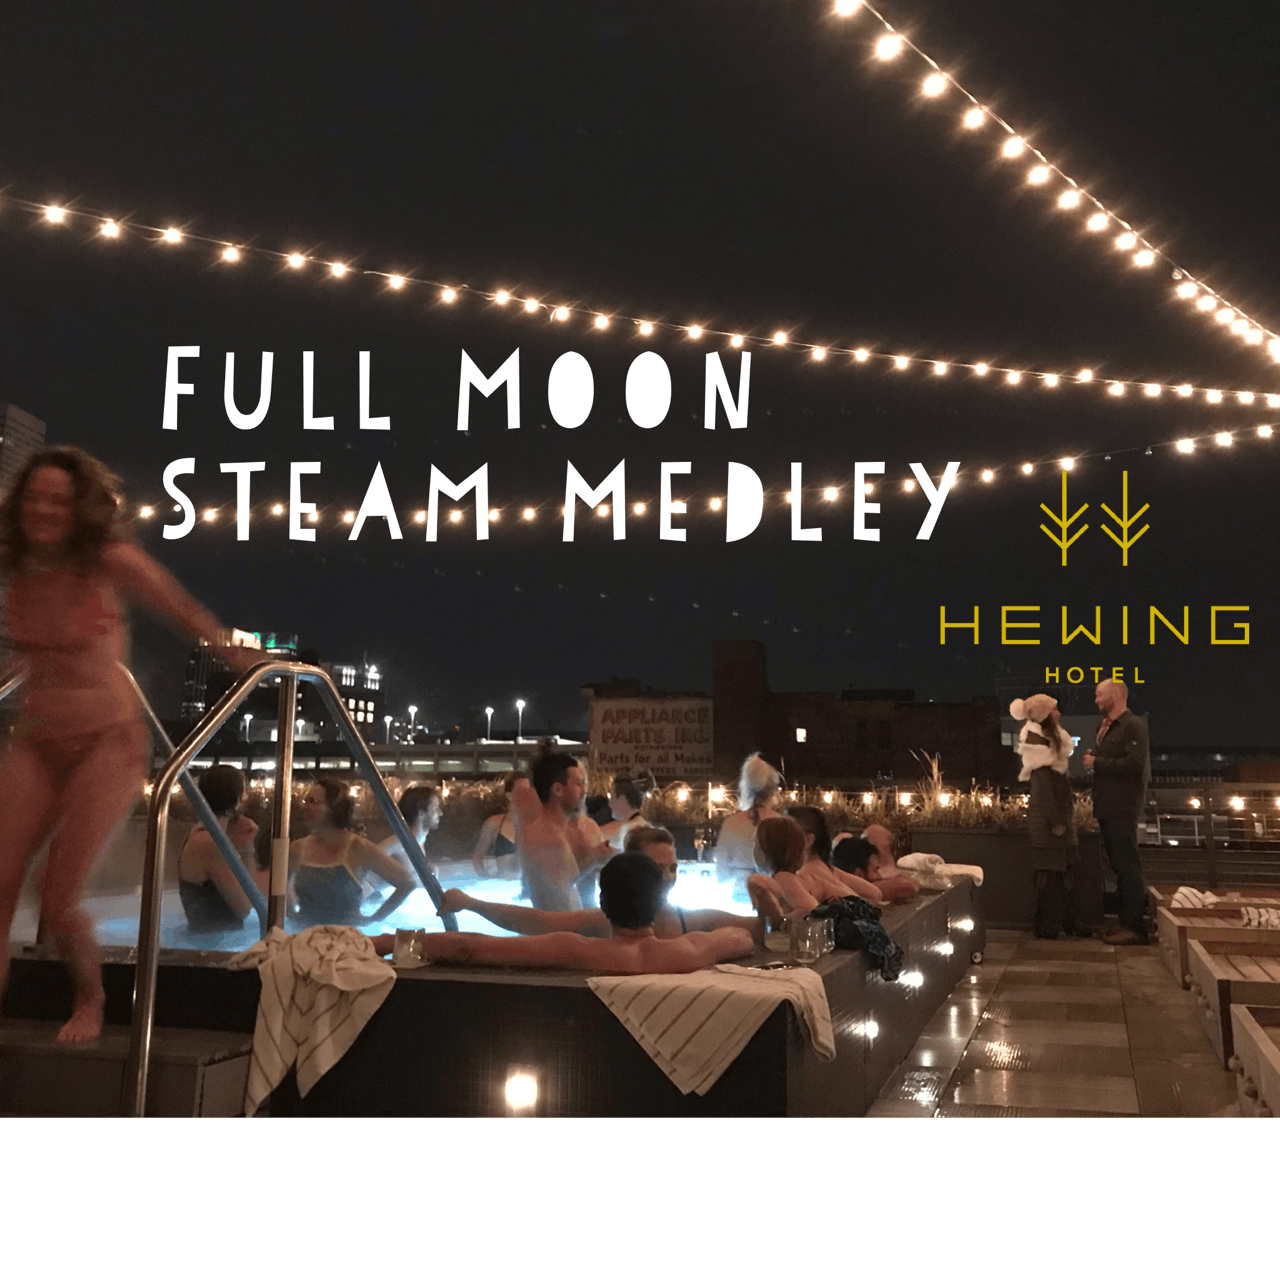 Full Moon Steam Medley at the Hewing Hotel 